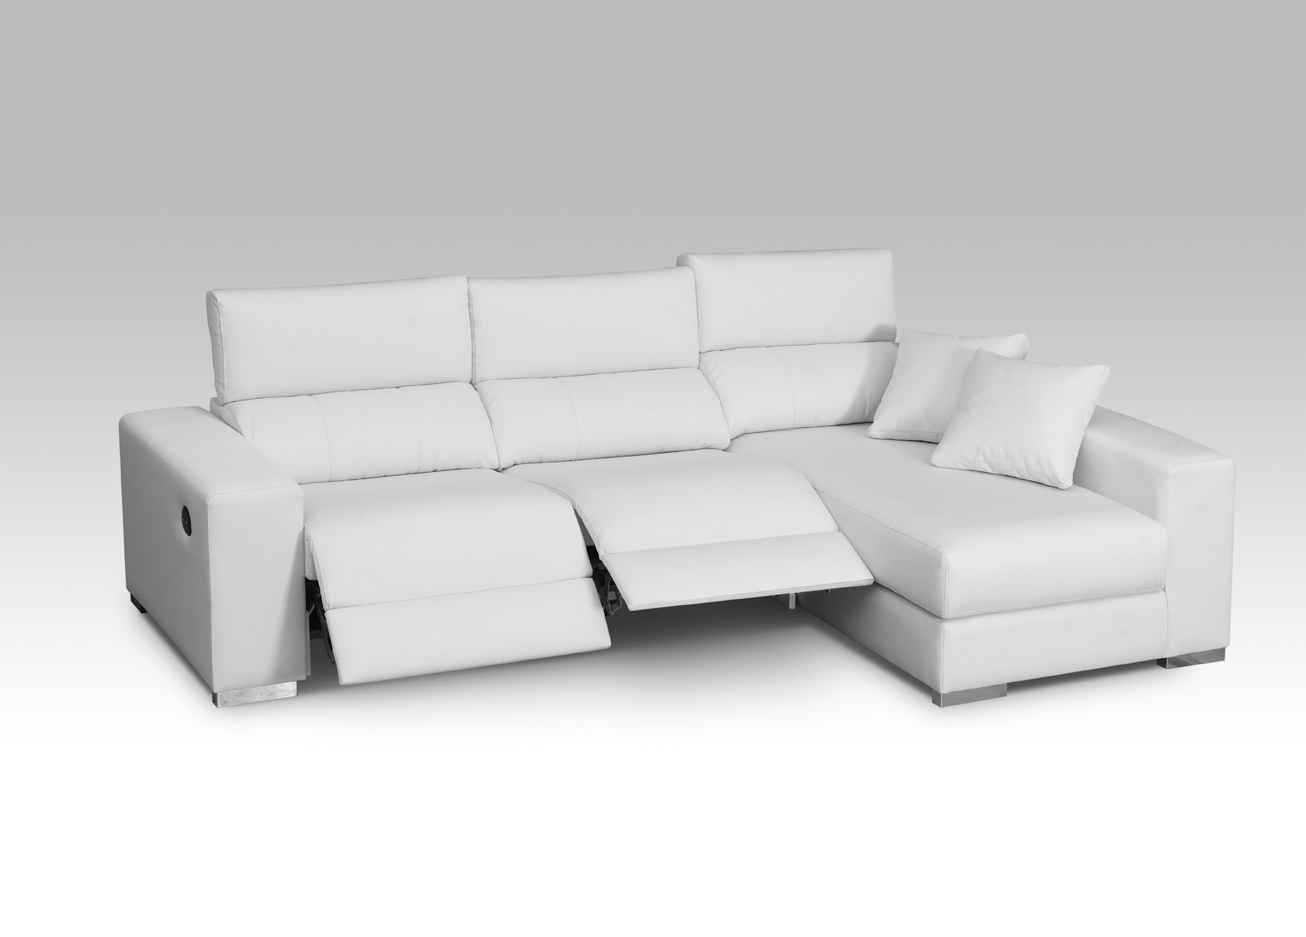 04_Chaise_longue_relax_con_motores